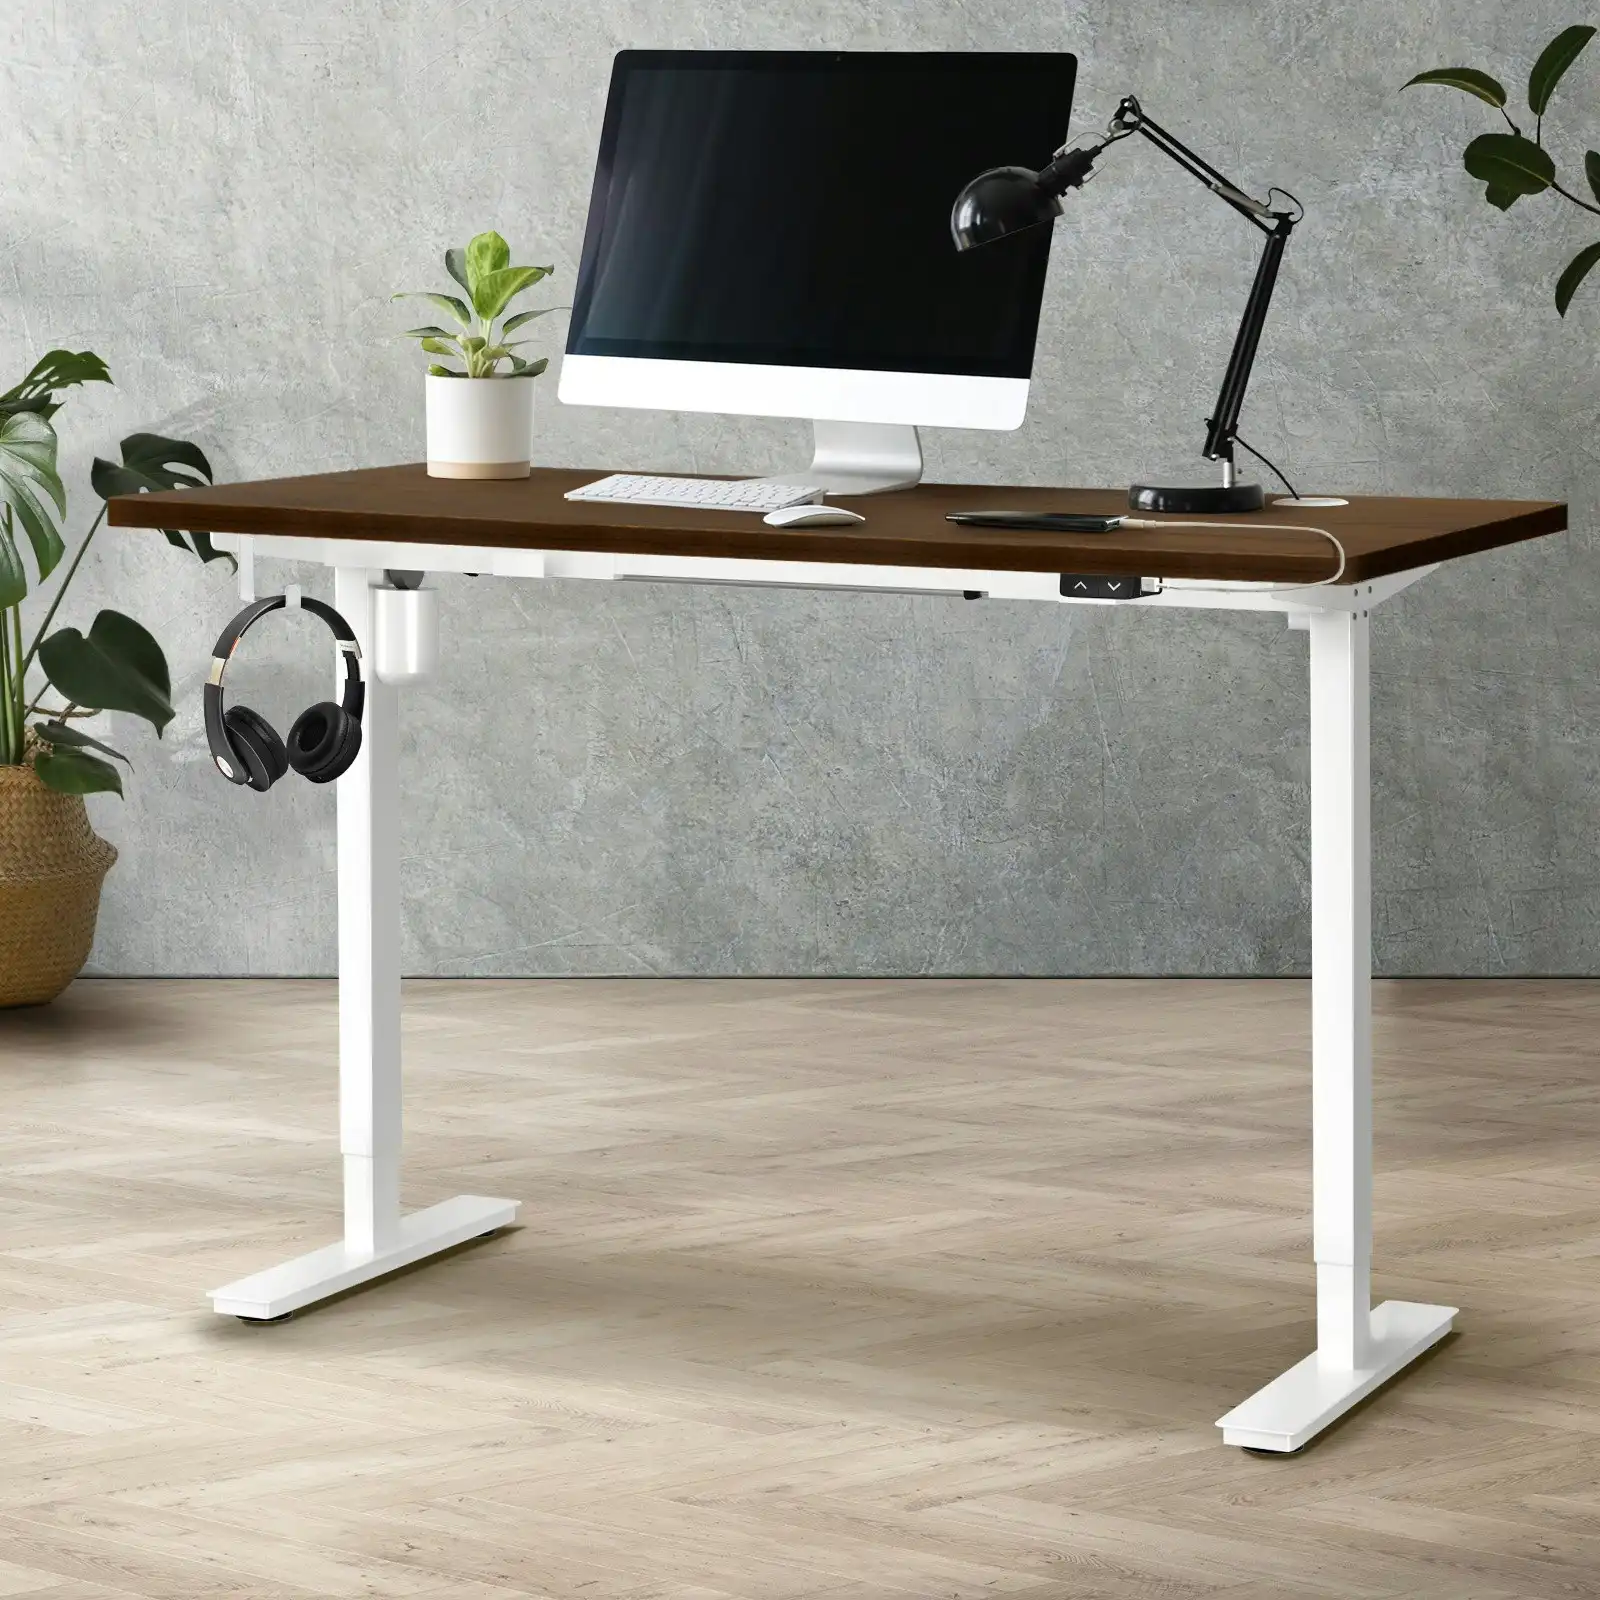 Oikiture 140CM Electric Standing Desk Single Motor Table Top Walnut